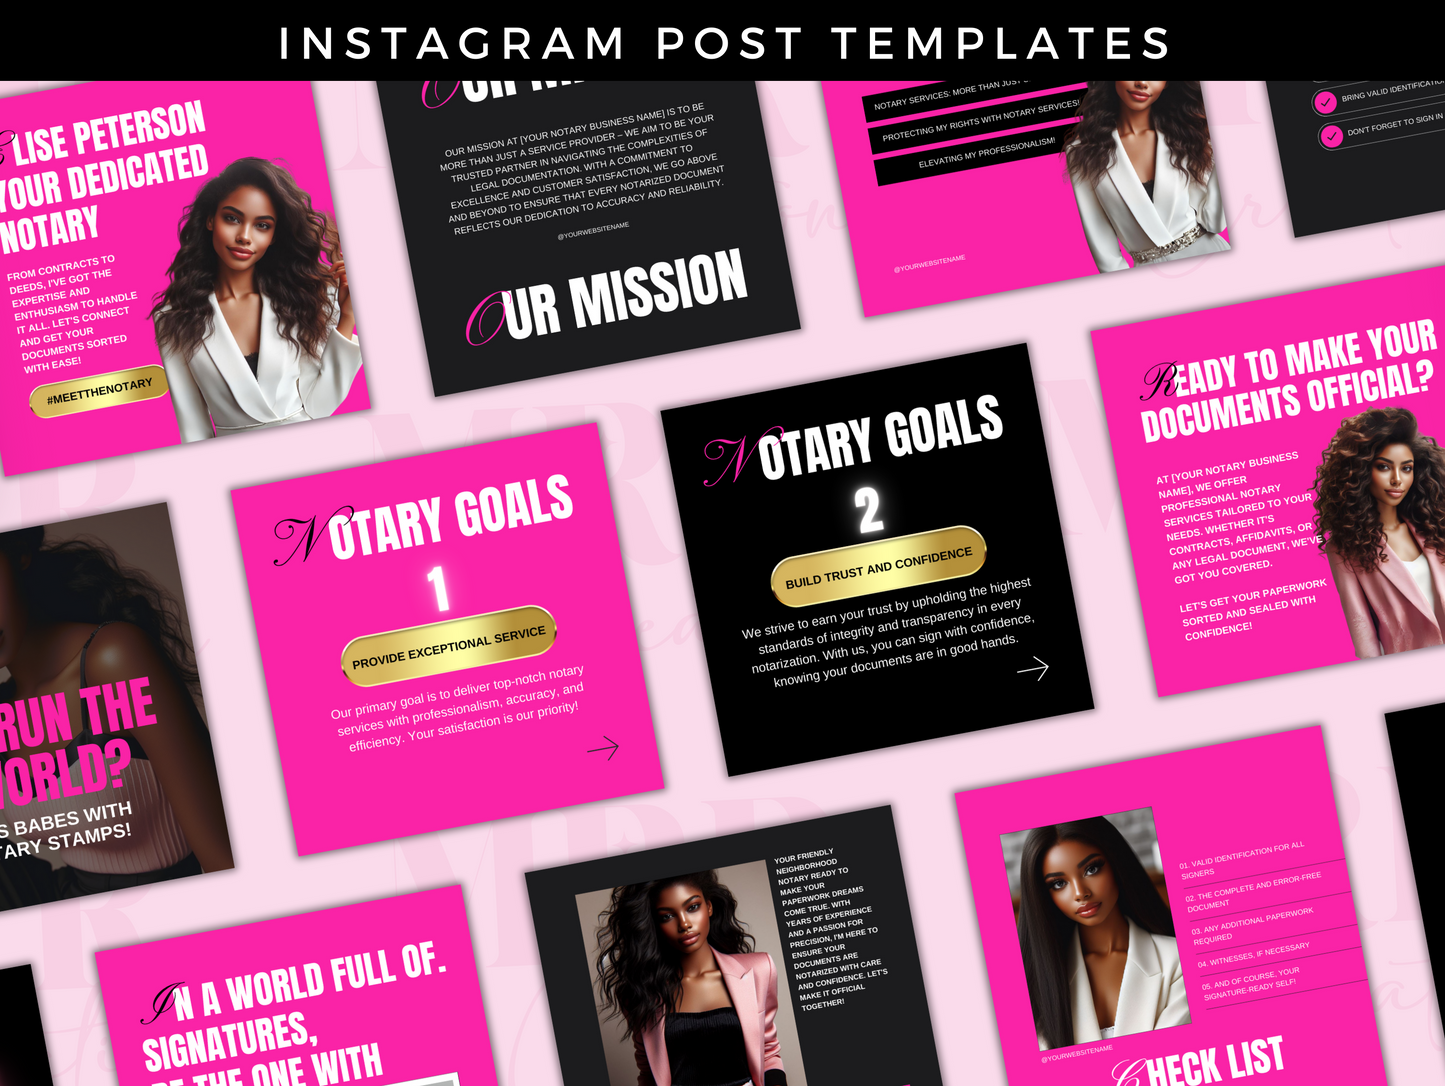 Notary Instagram Post Canva Templates